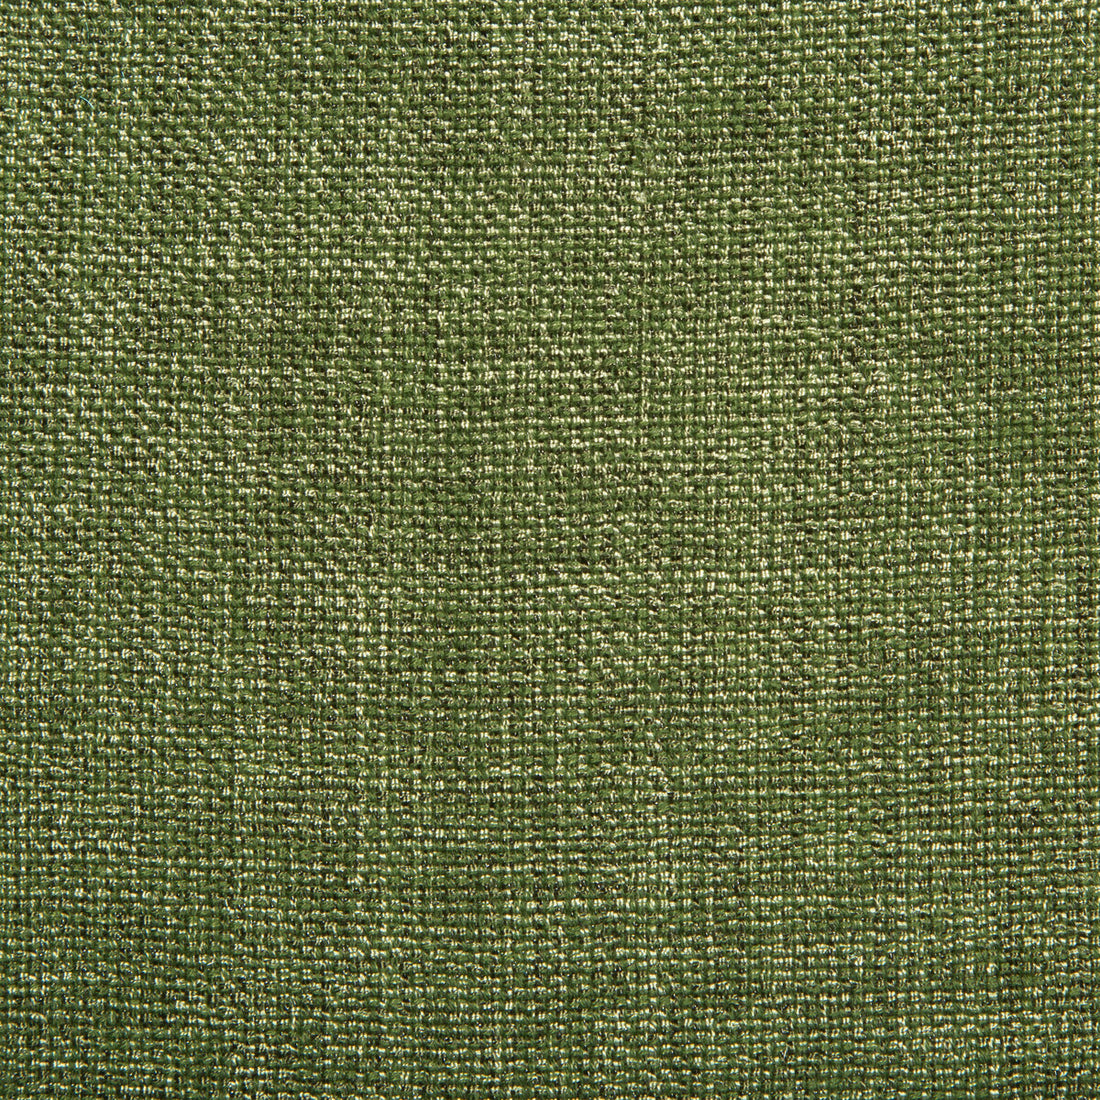 Kravet Contract fabric in 4458-303 color - pattern 4458.303.0 - by Kravet Contract